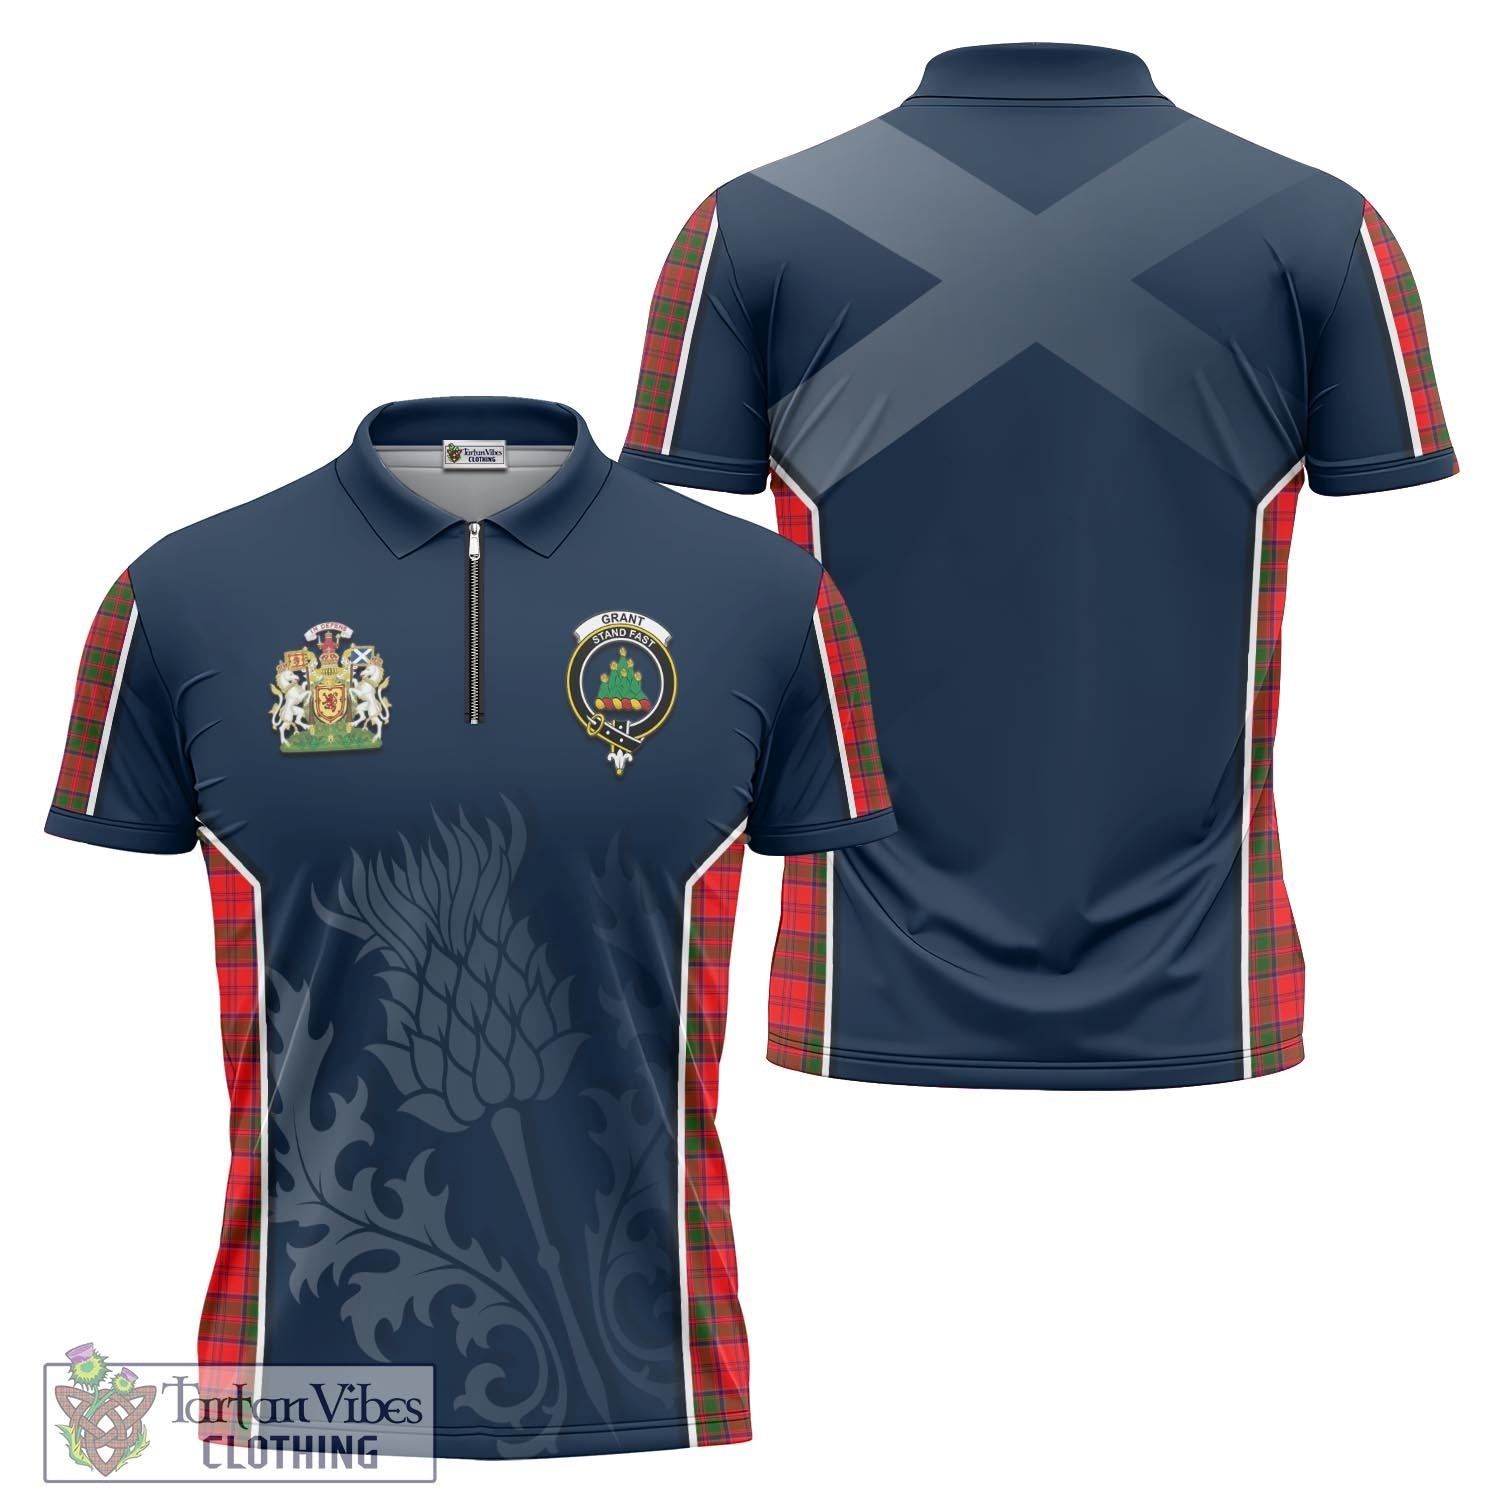 Tartan Vibes Clothing Grant Modern Tartan Zipper Polo Shirt with Family Crest and Scottish Thistle Vibes Sport Style